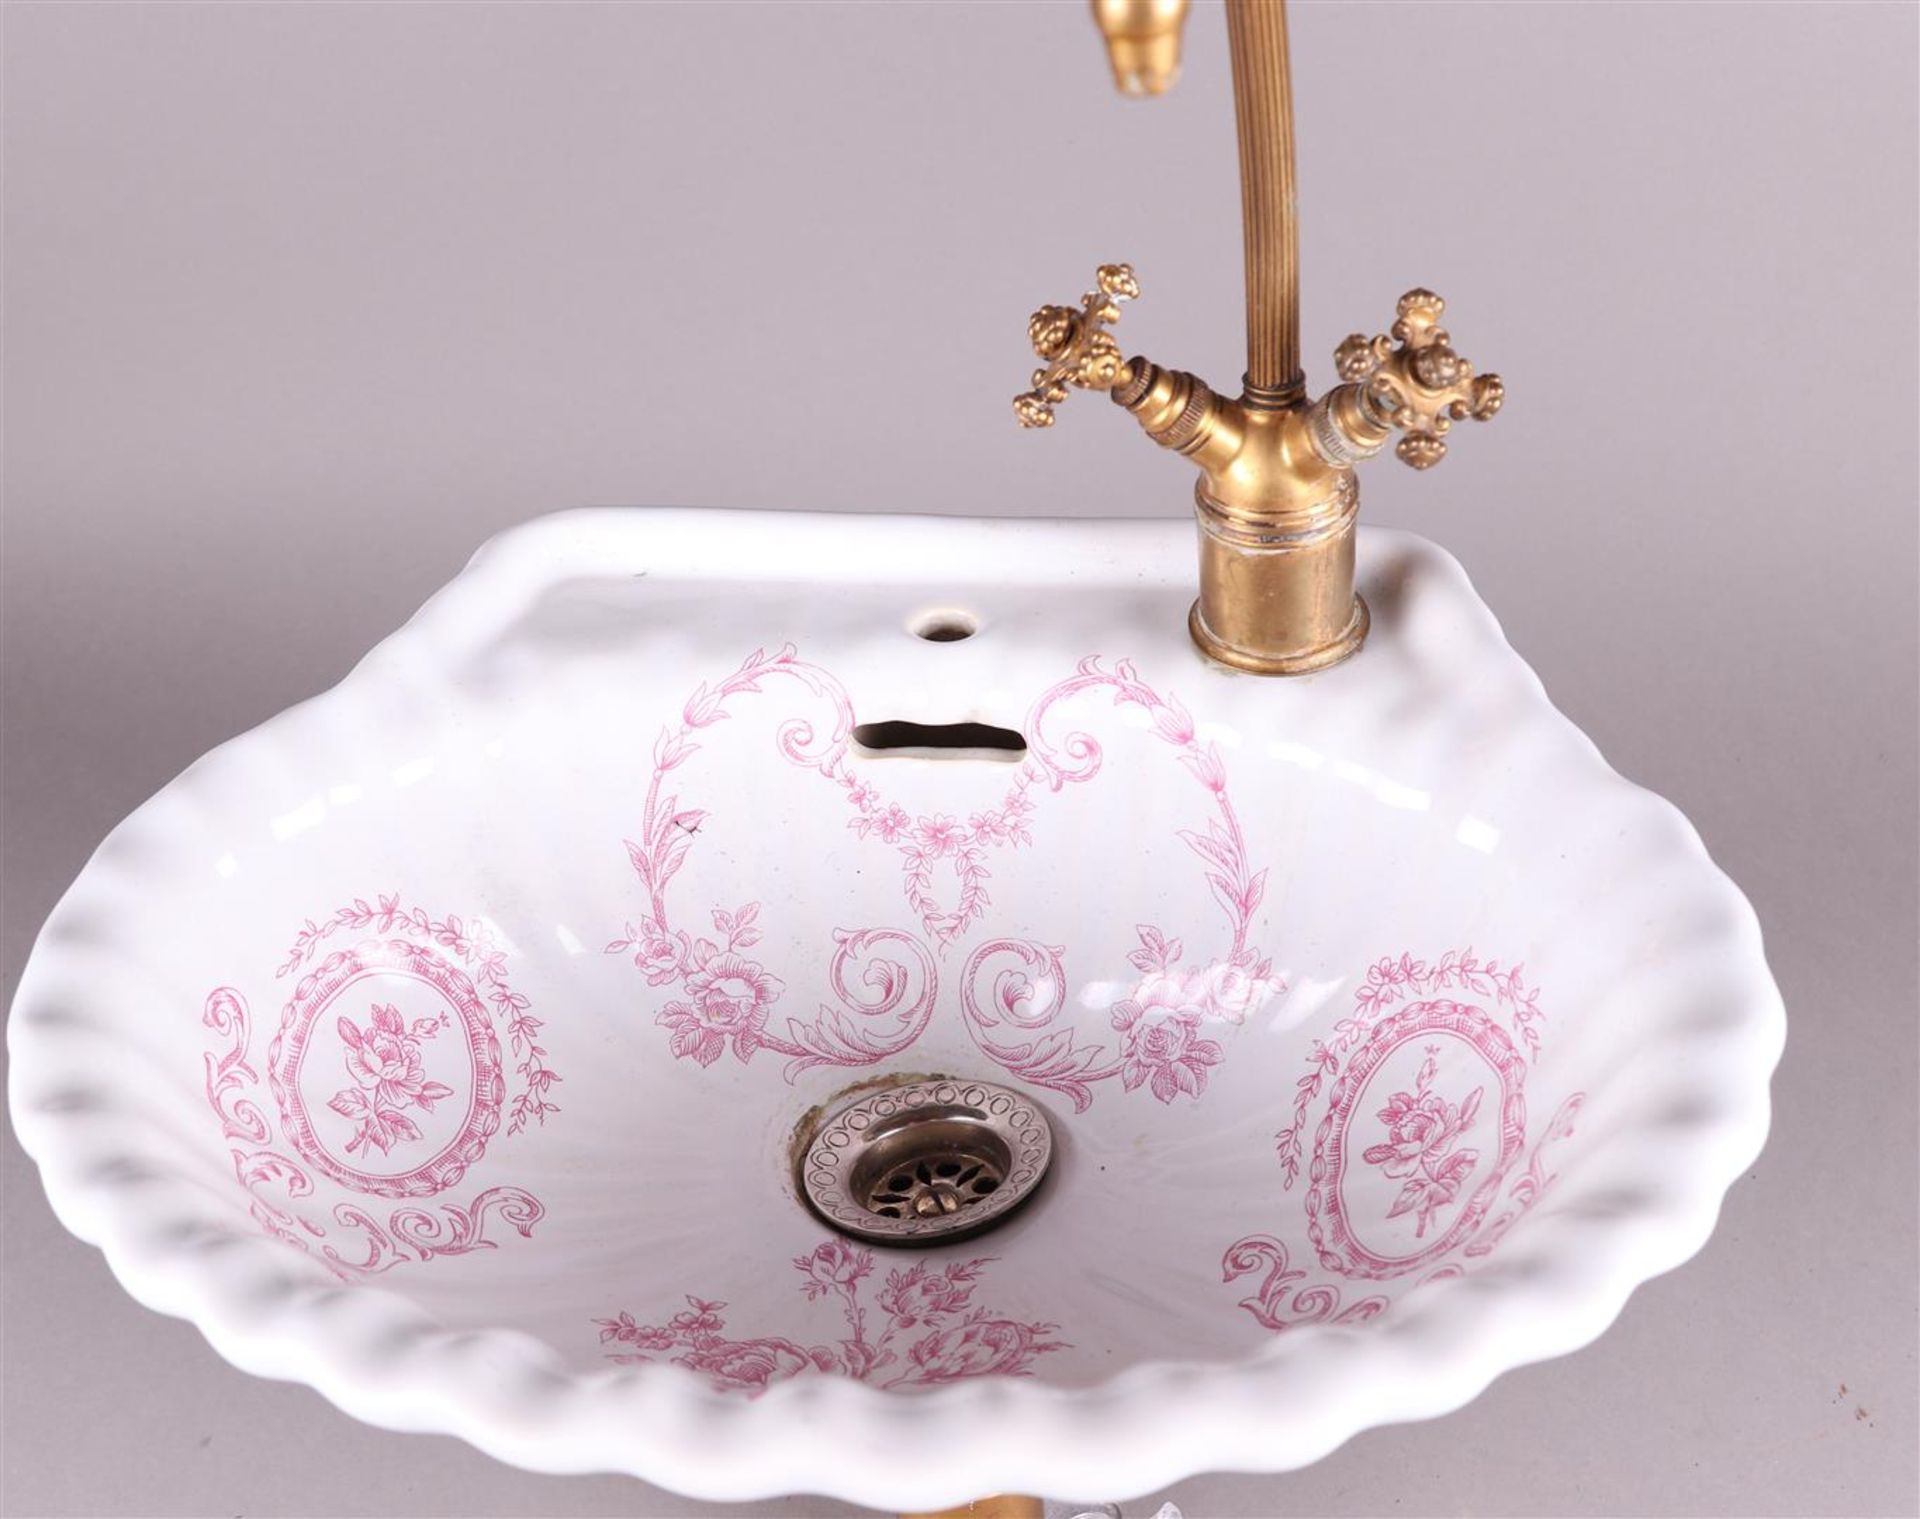 An earthenware sink decorated with flowers and a brass faucet. Early 20th century. - Image 4 of 4